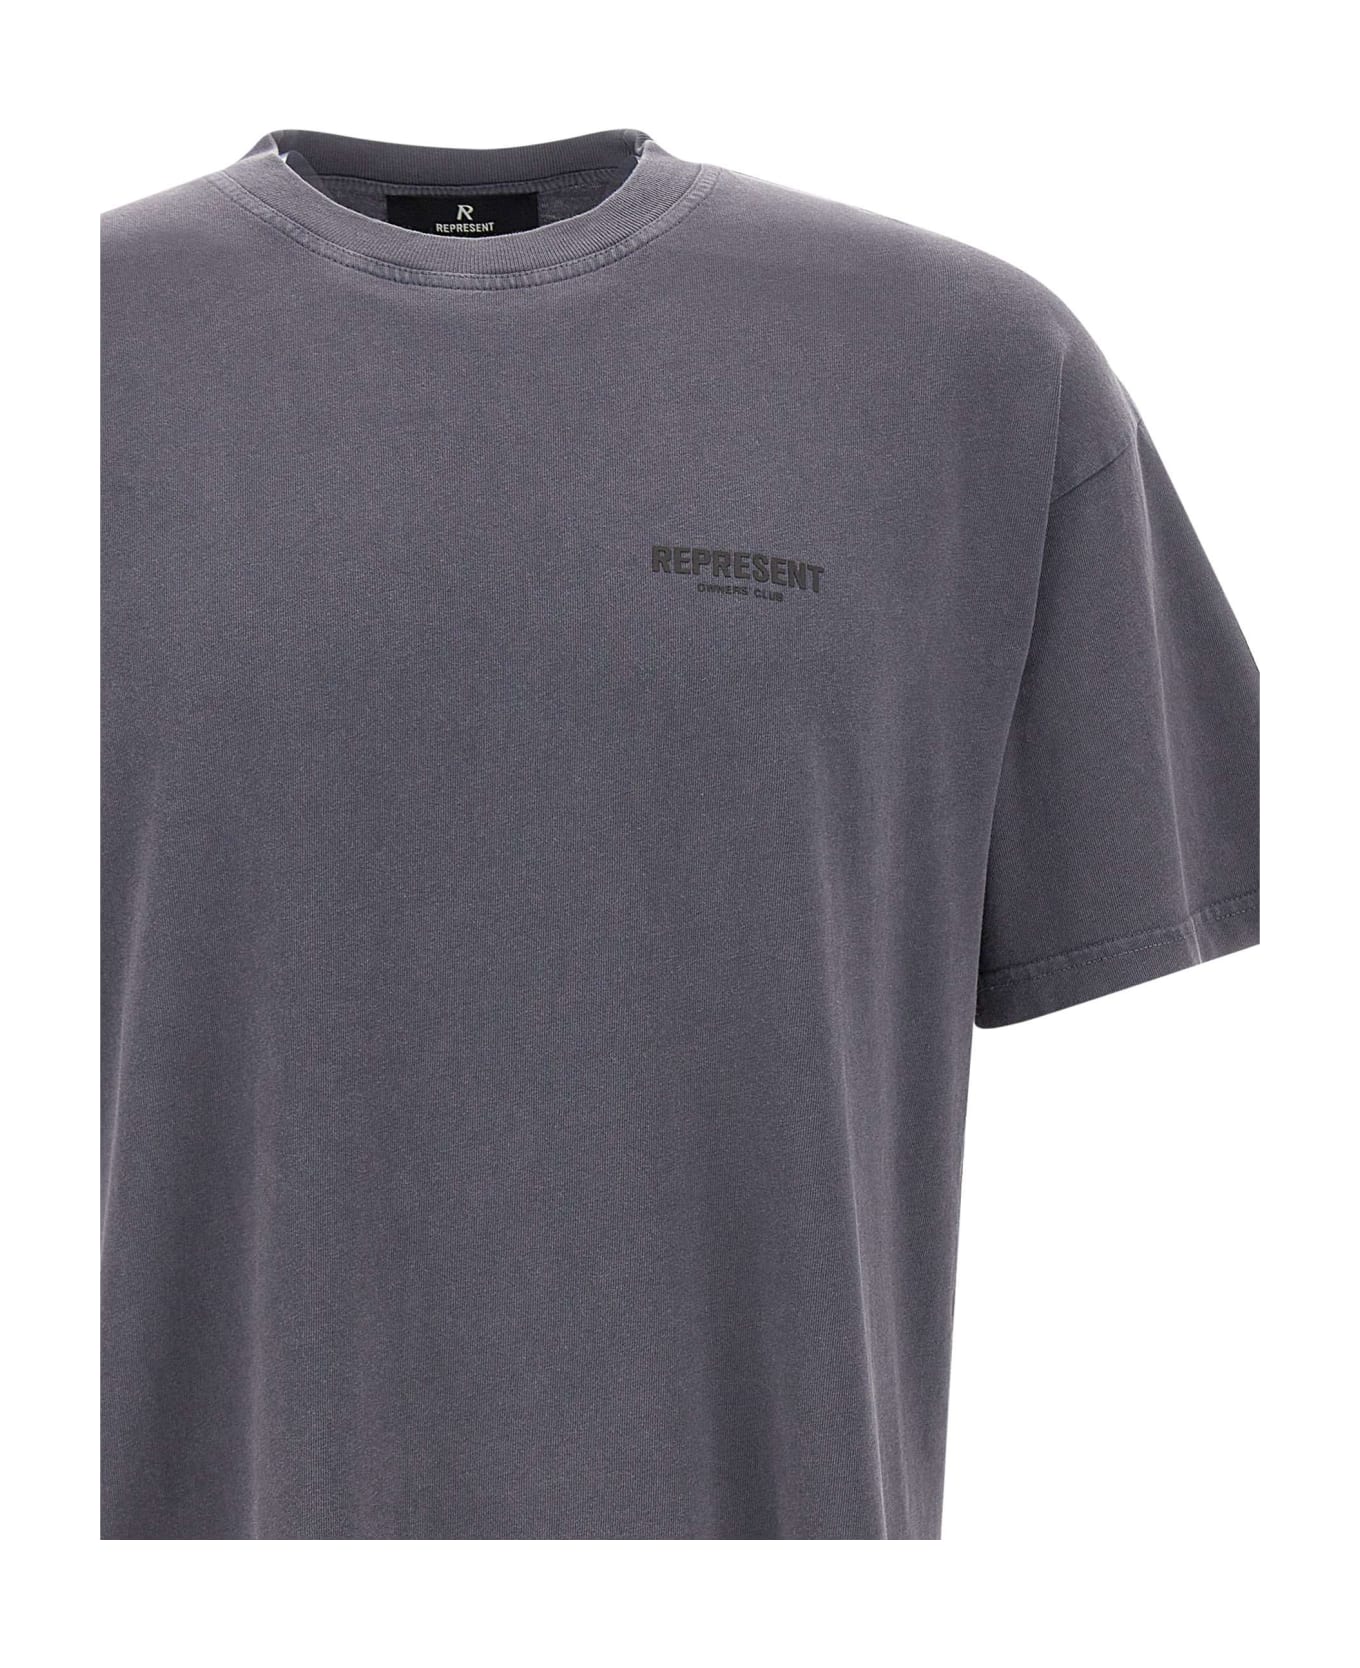 REPRESENT "owners Club" Cotton T-shirt - GREY